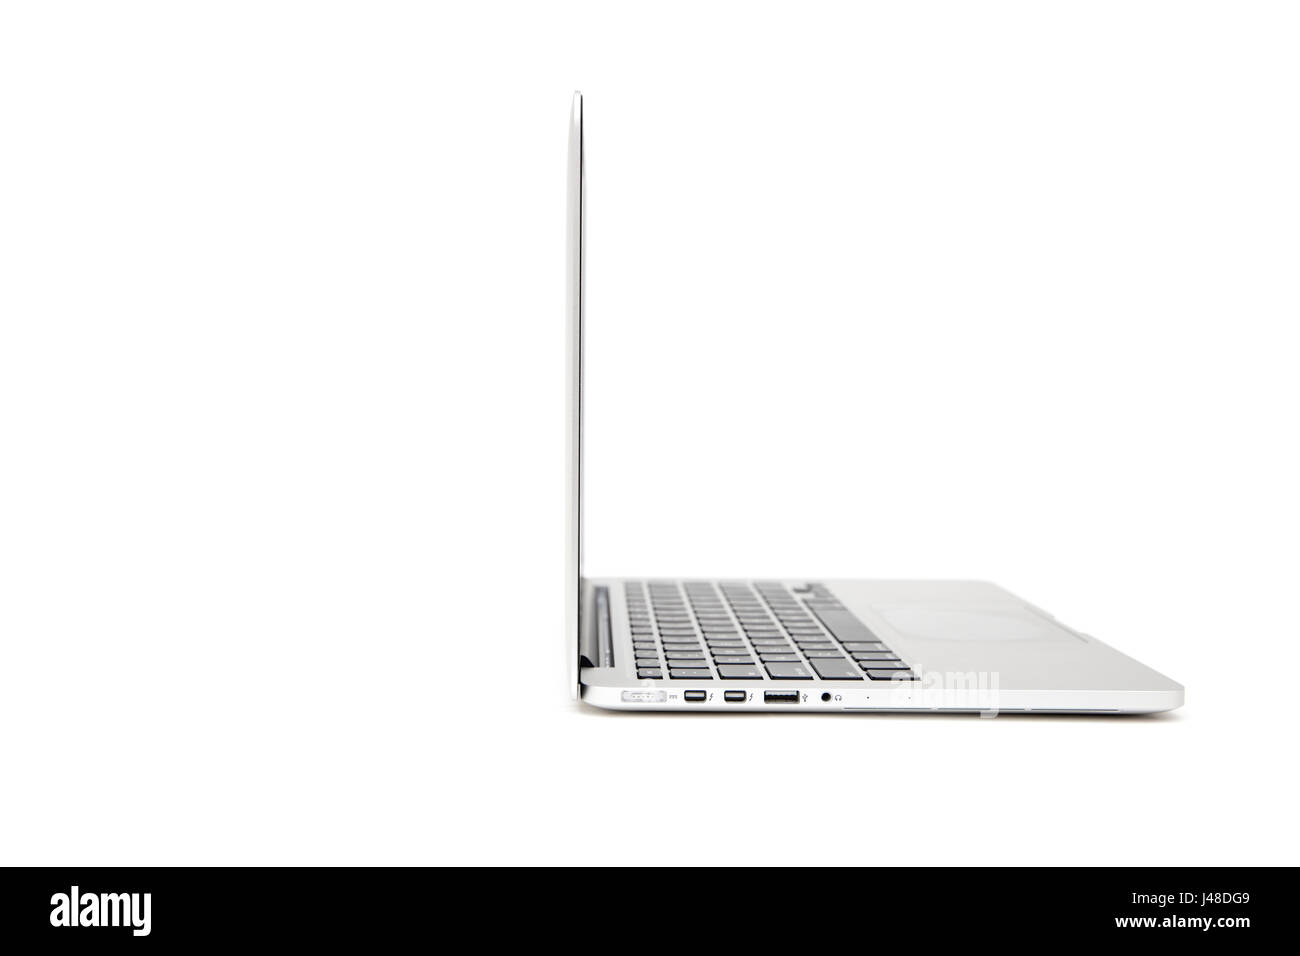 BELGRADE, SERBIA - MARCH 3, 2017: MacBook computer isolated on white. The MacBook is a brand of notebook computers manufactured by Apple Inc. Stock Photo